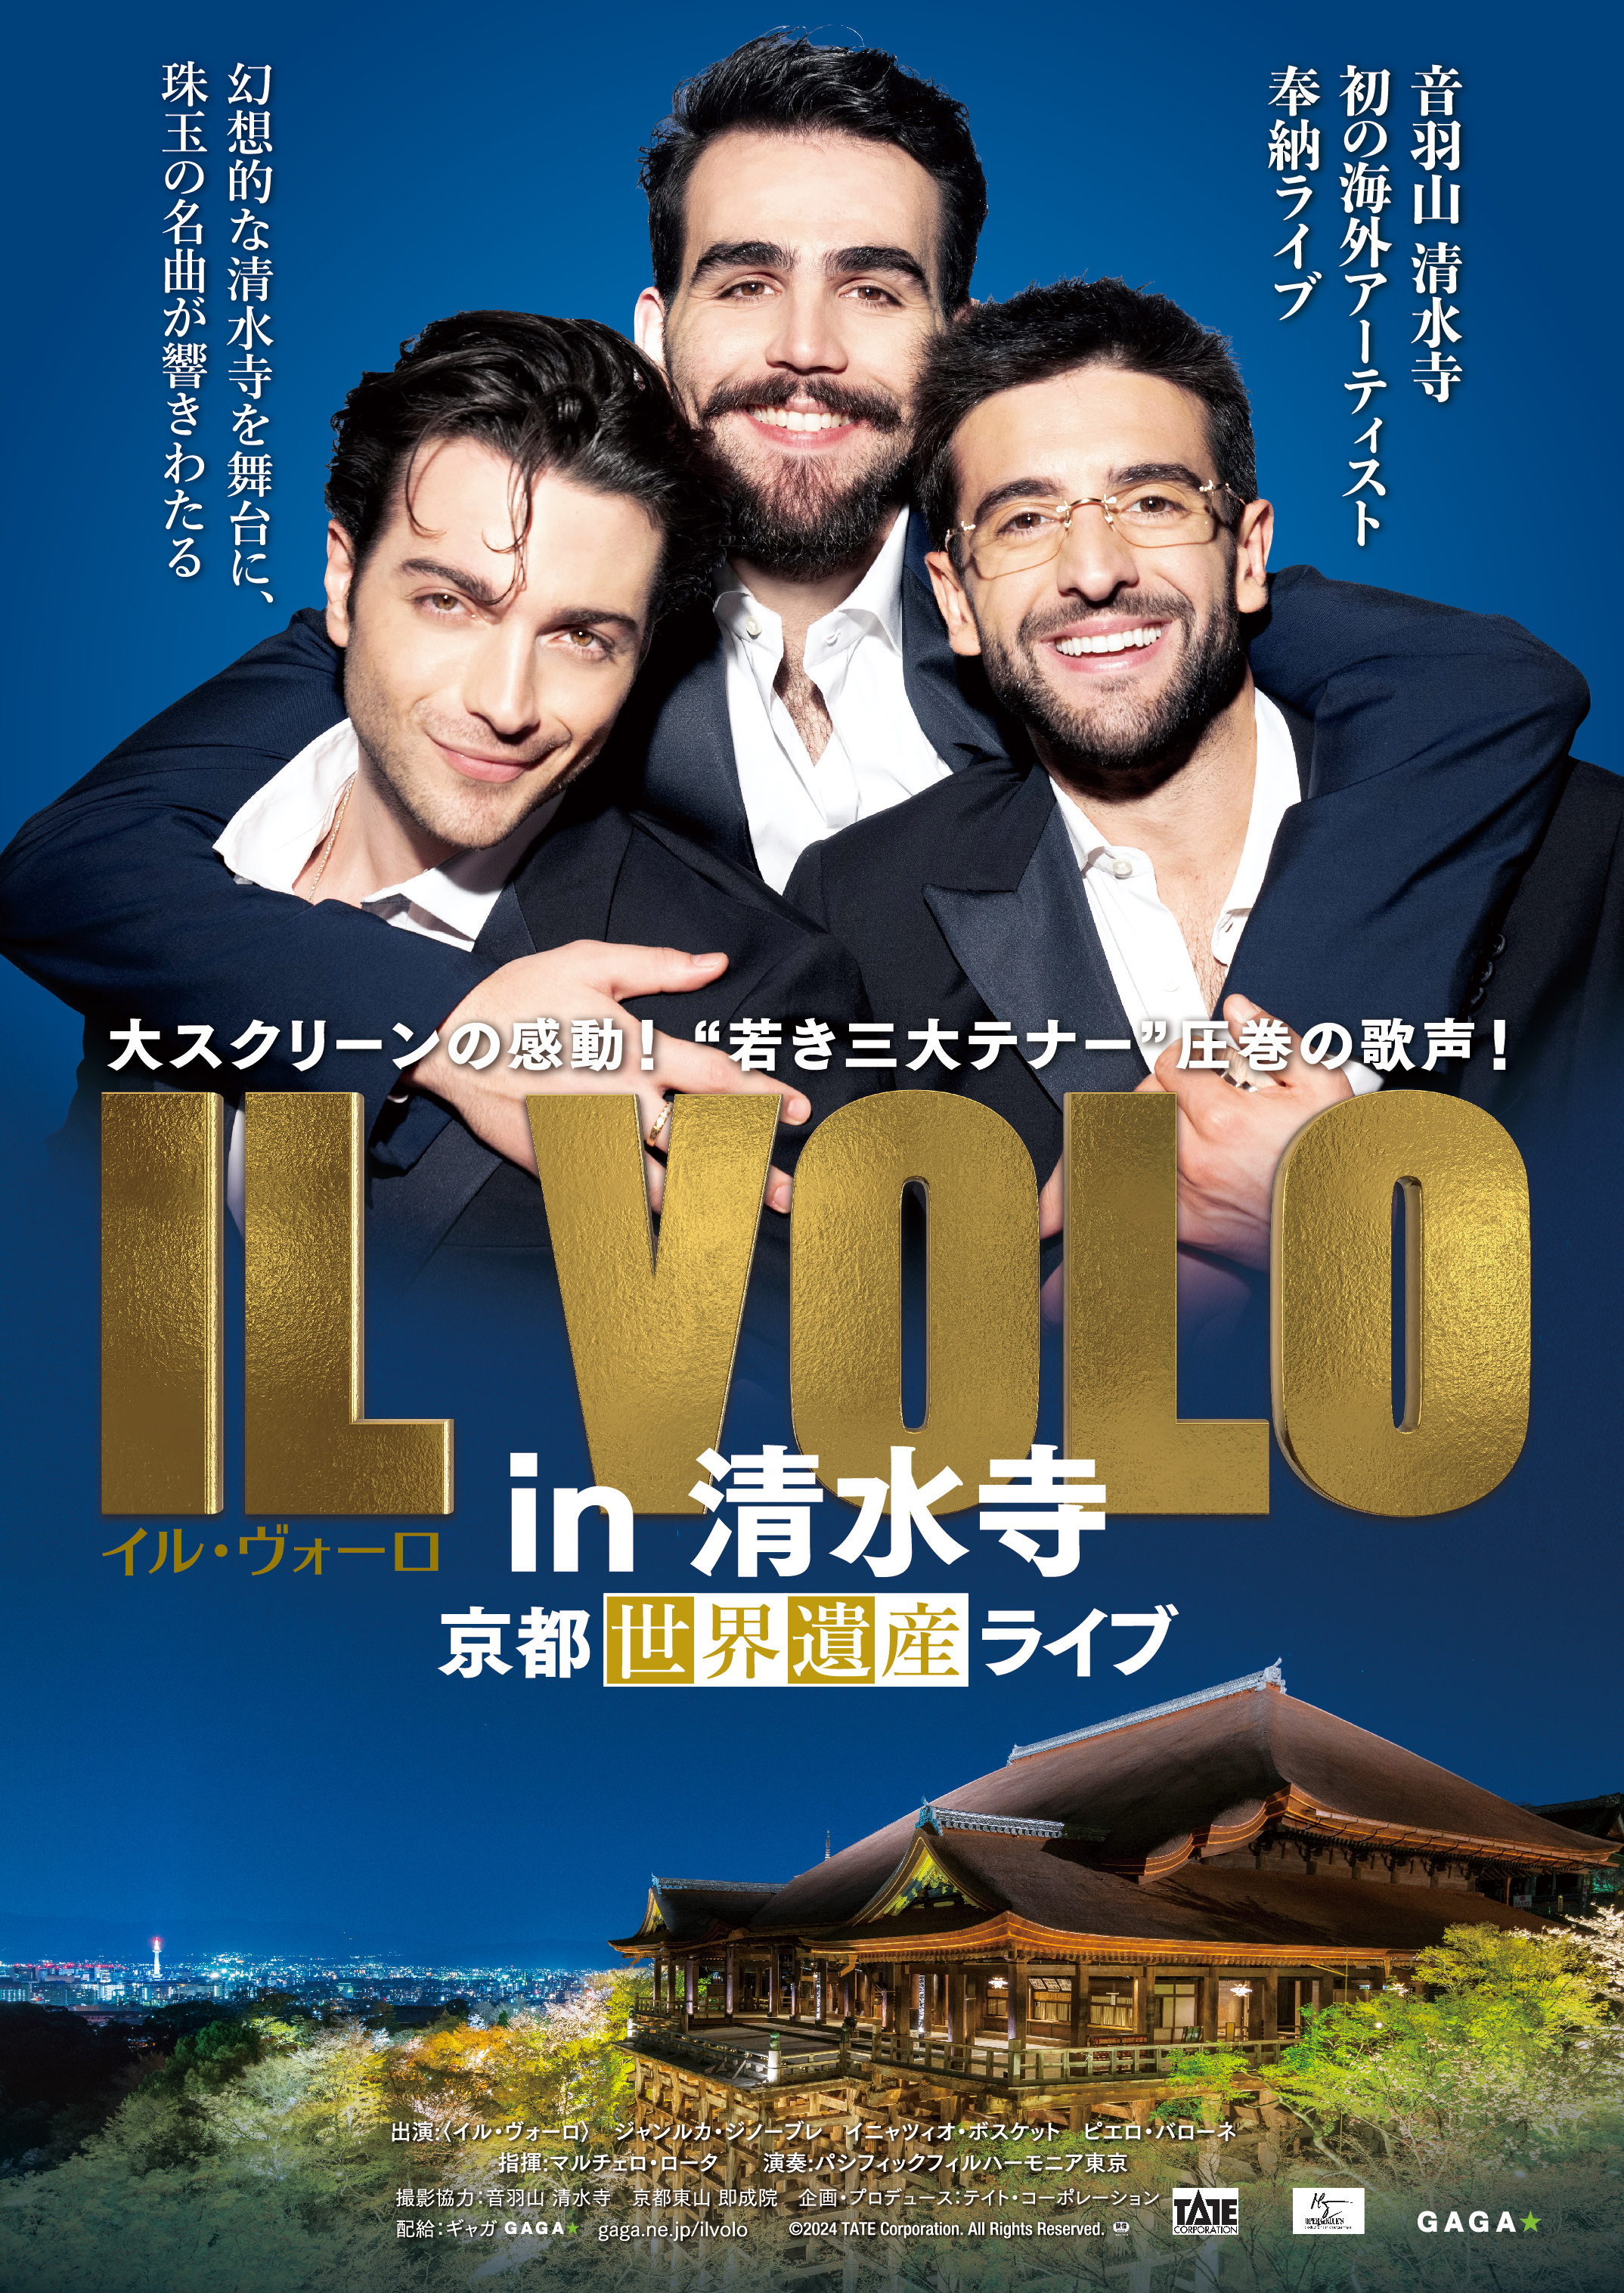 「IL VOLO in 清水寺～京都世界遺産ライブ～」